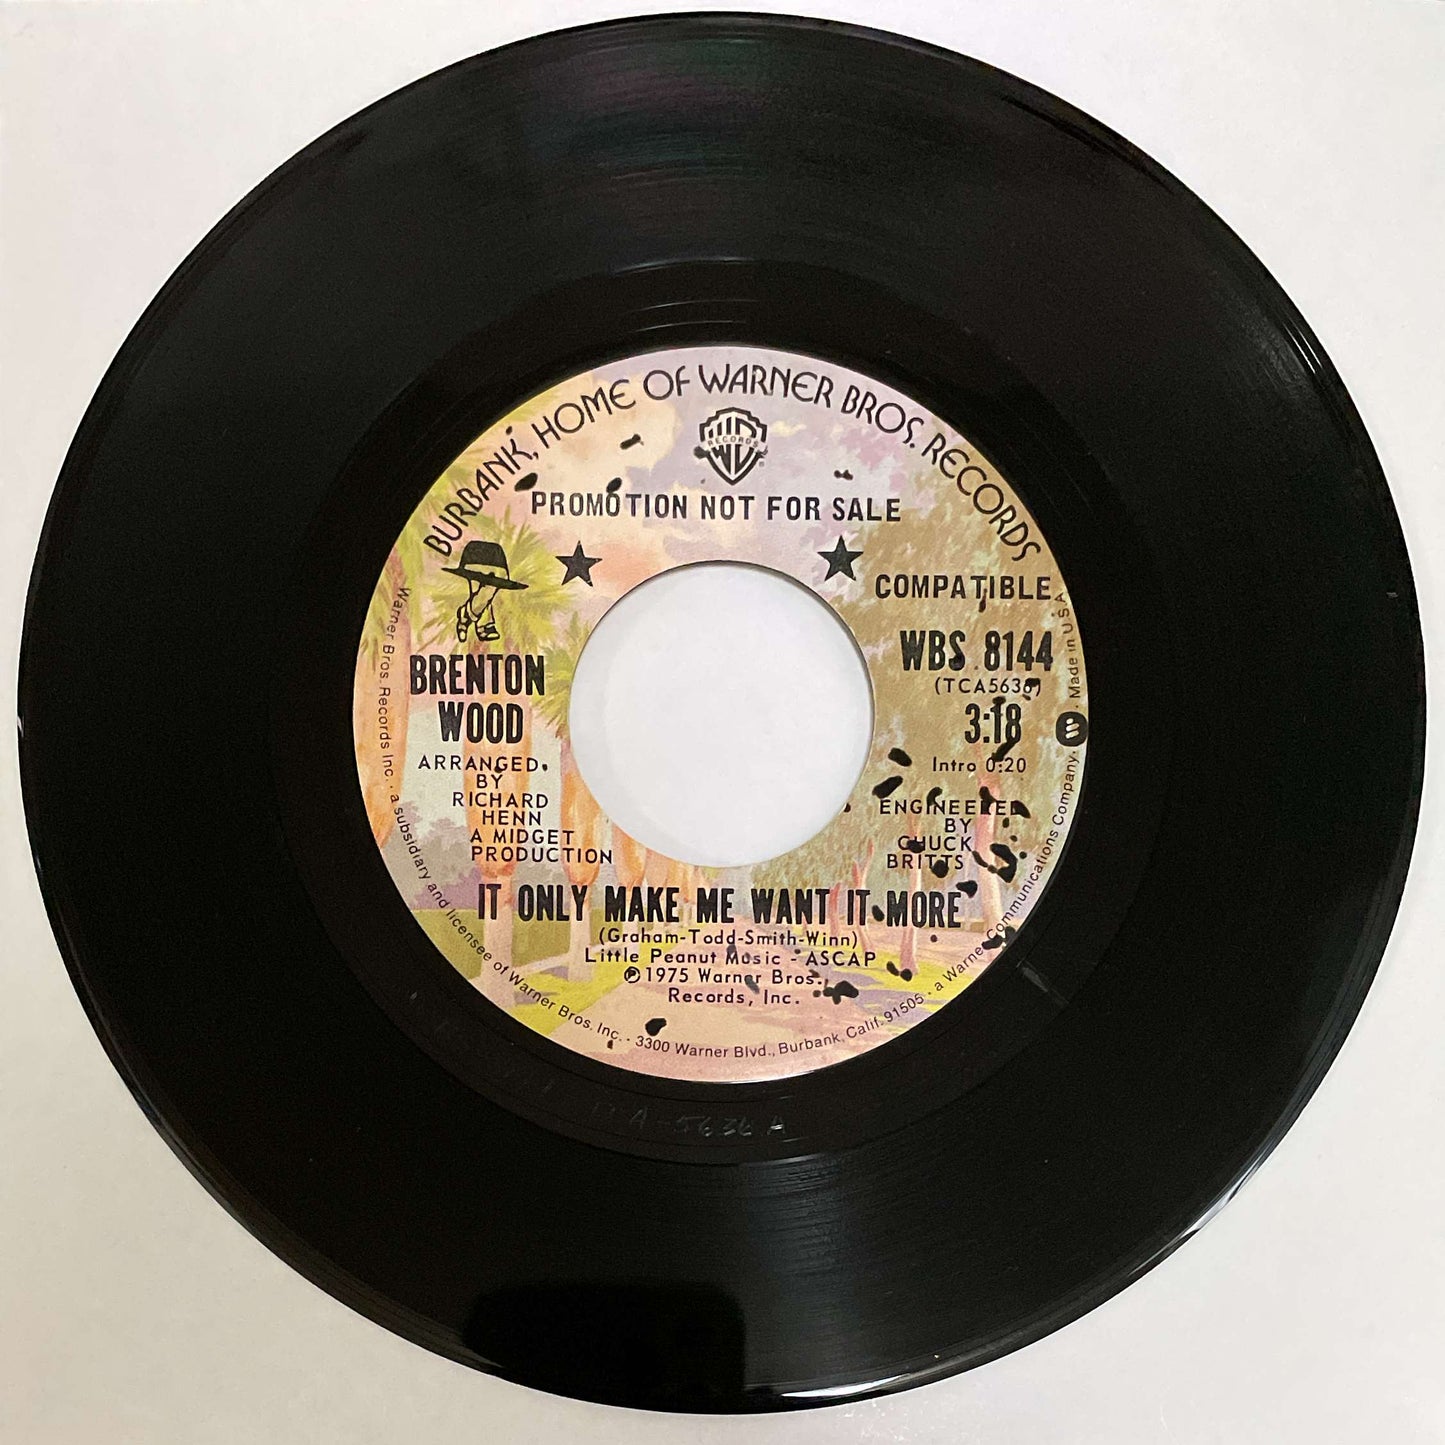 Brenton Wood – Better Believe It / It Only Make Me Want It More ( Warner Bros. Records ) 45